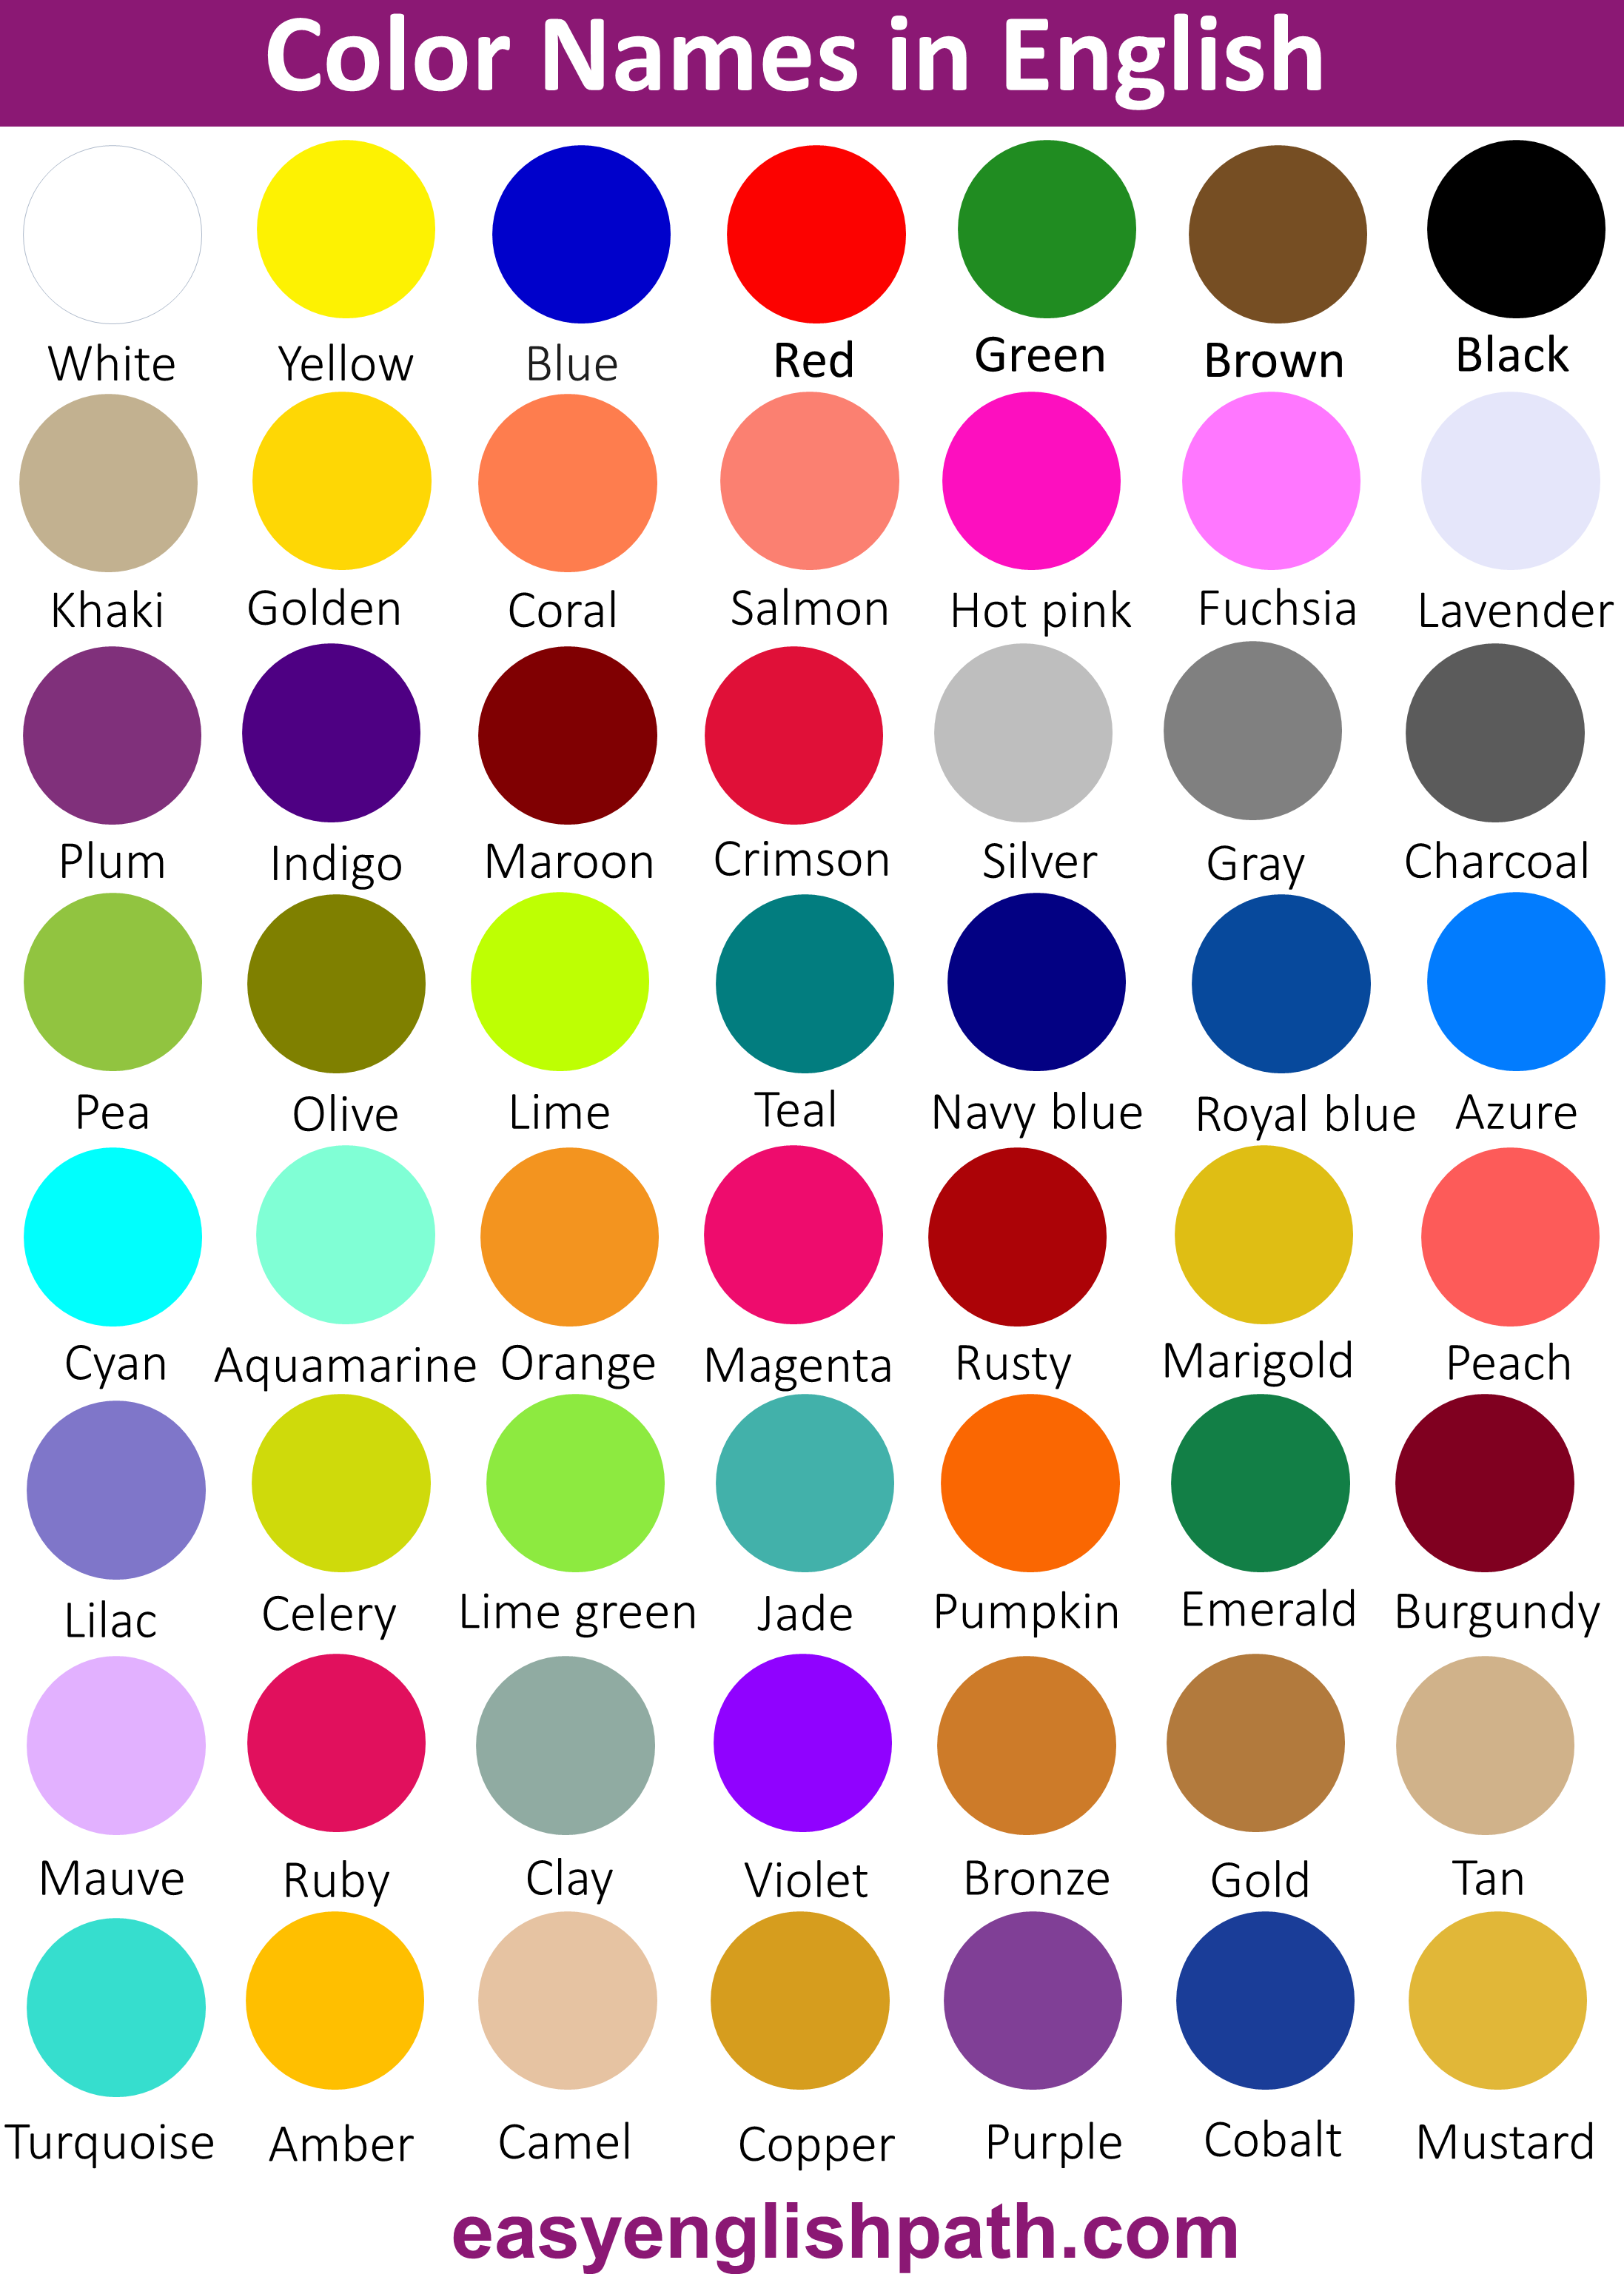 Colors Names in English with Pictures - EasyEnglishPath